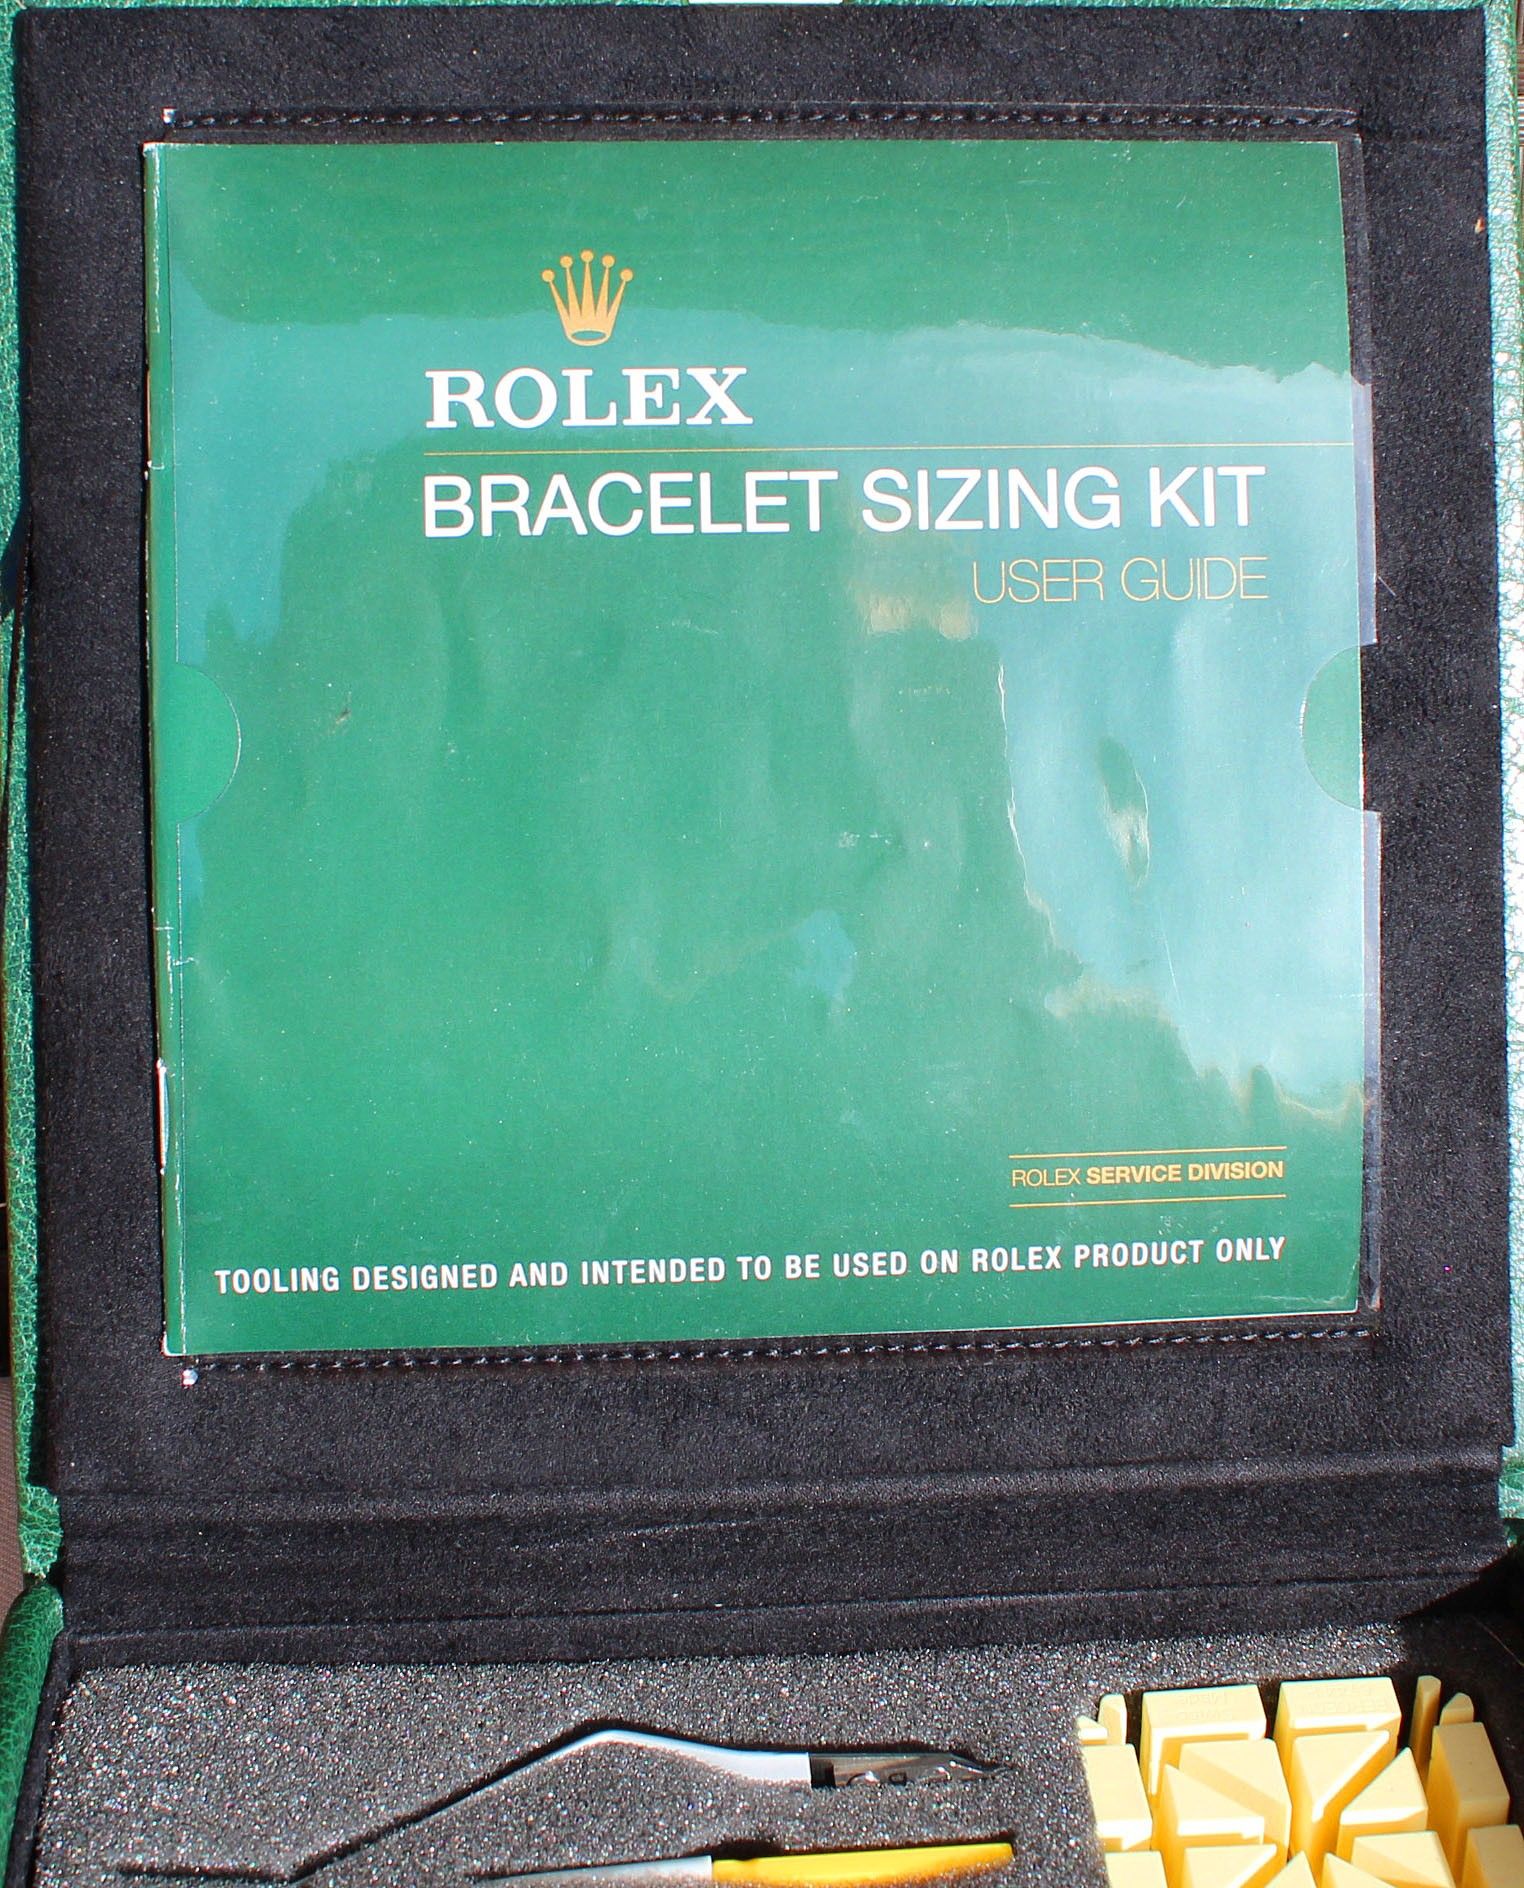 Rolex Screwdriver 2100 Genuine Watch Tool Bracelet Sizing... for $550 for  sale from a Trusted Seller on Chrono24